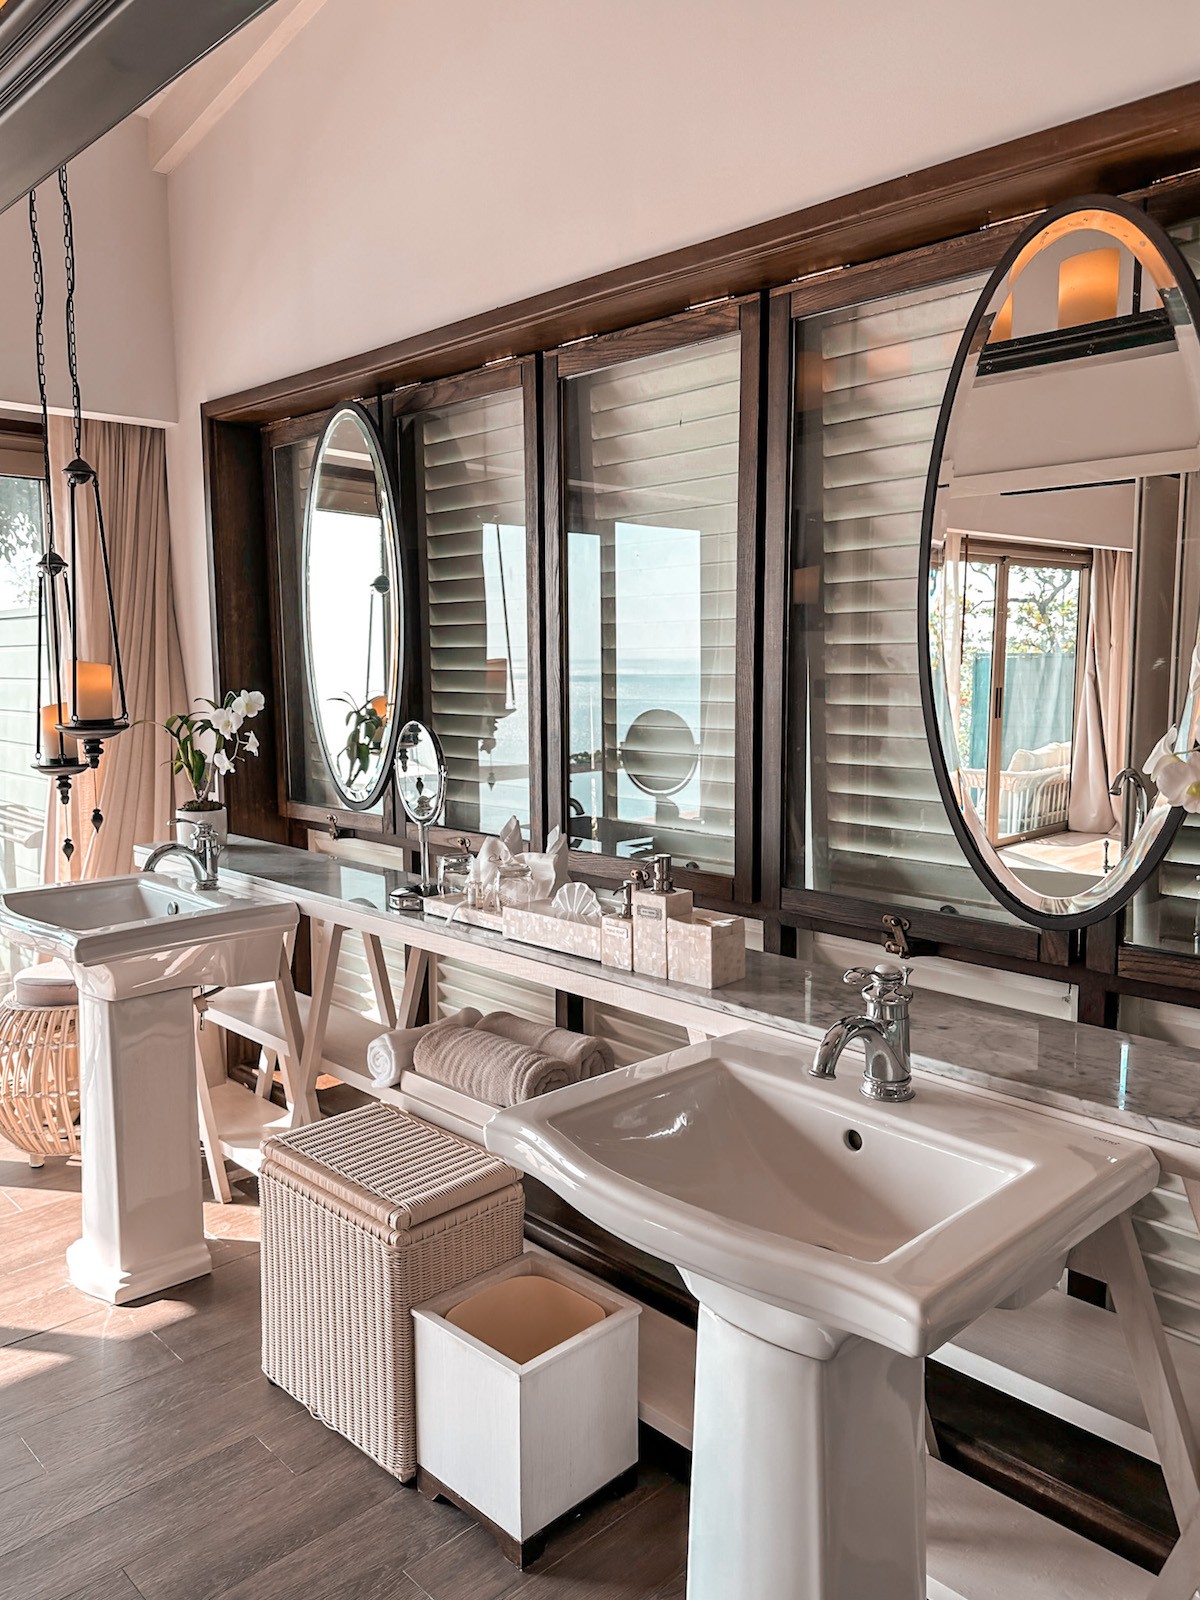 His and hers sinks in bathrooms at The Shore at Katathani in Phuket